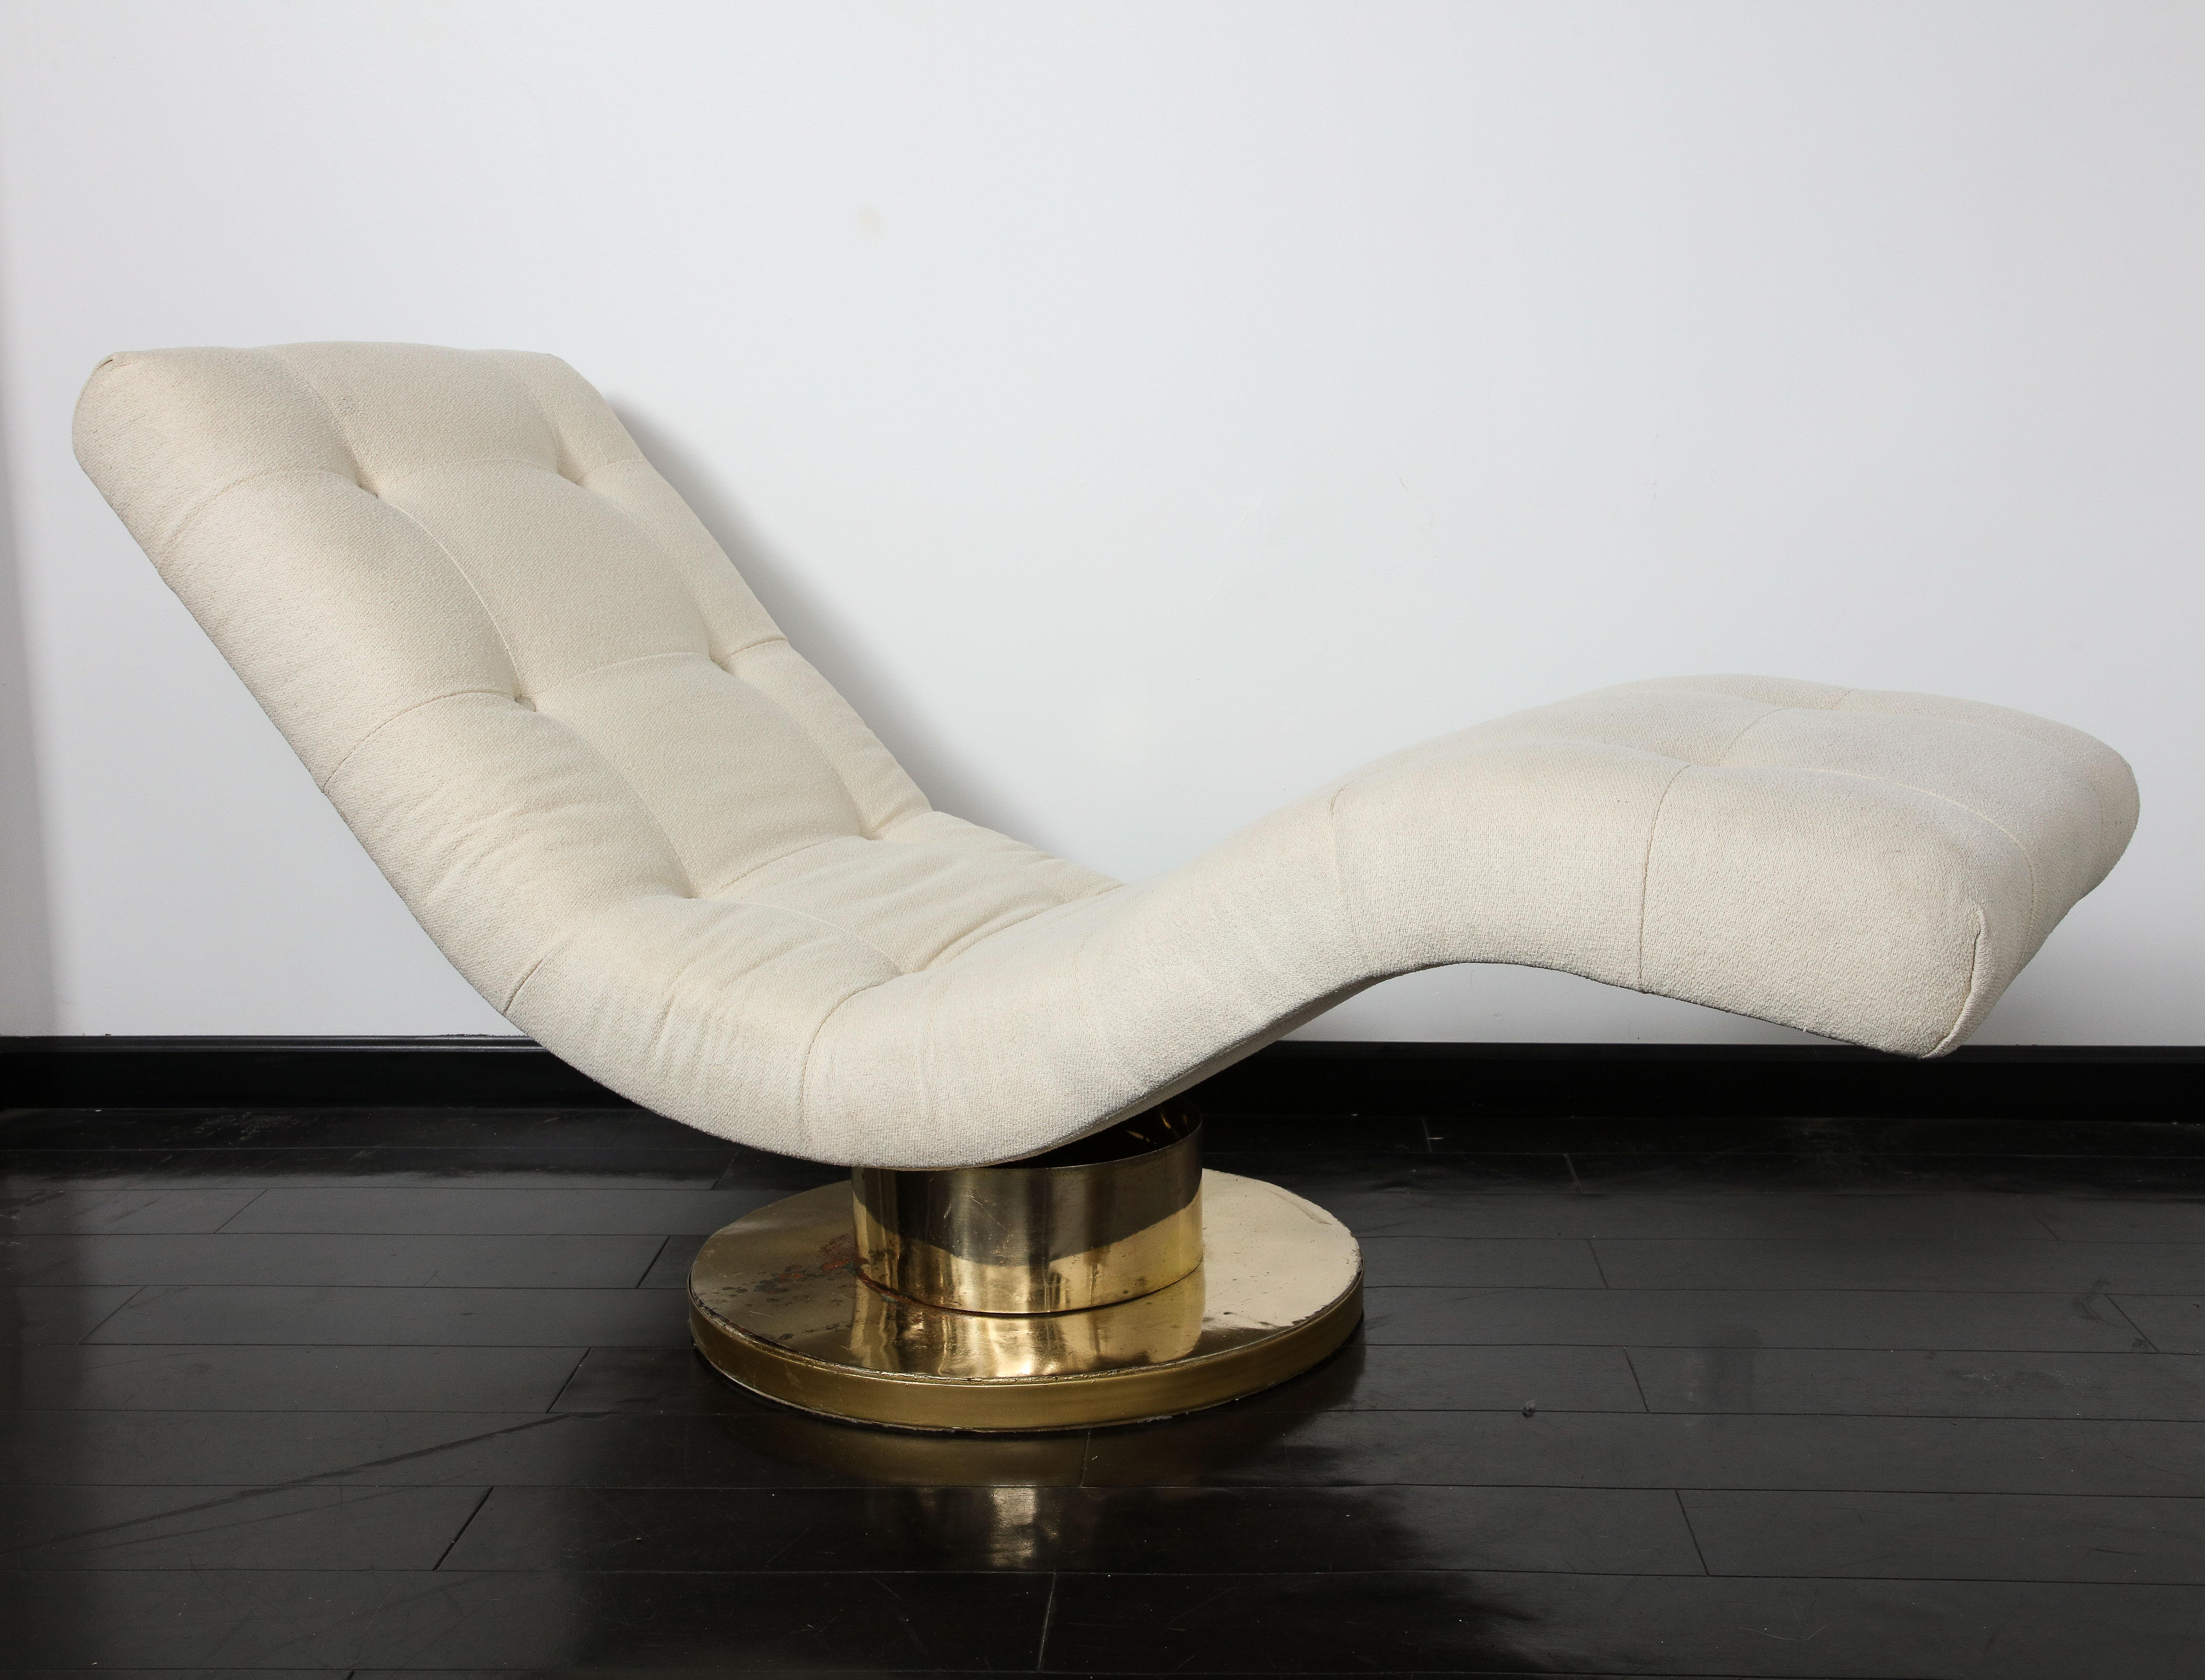 Late 20th Century Milo Baughman Wave Chaise Lounge Chair with Tufted Top and Brass Base, 1970s For Sale